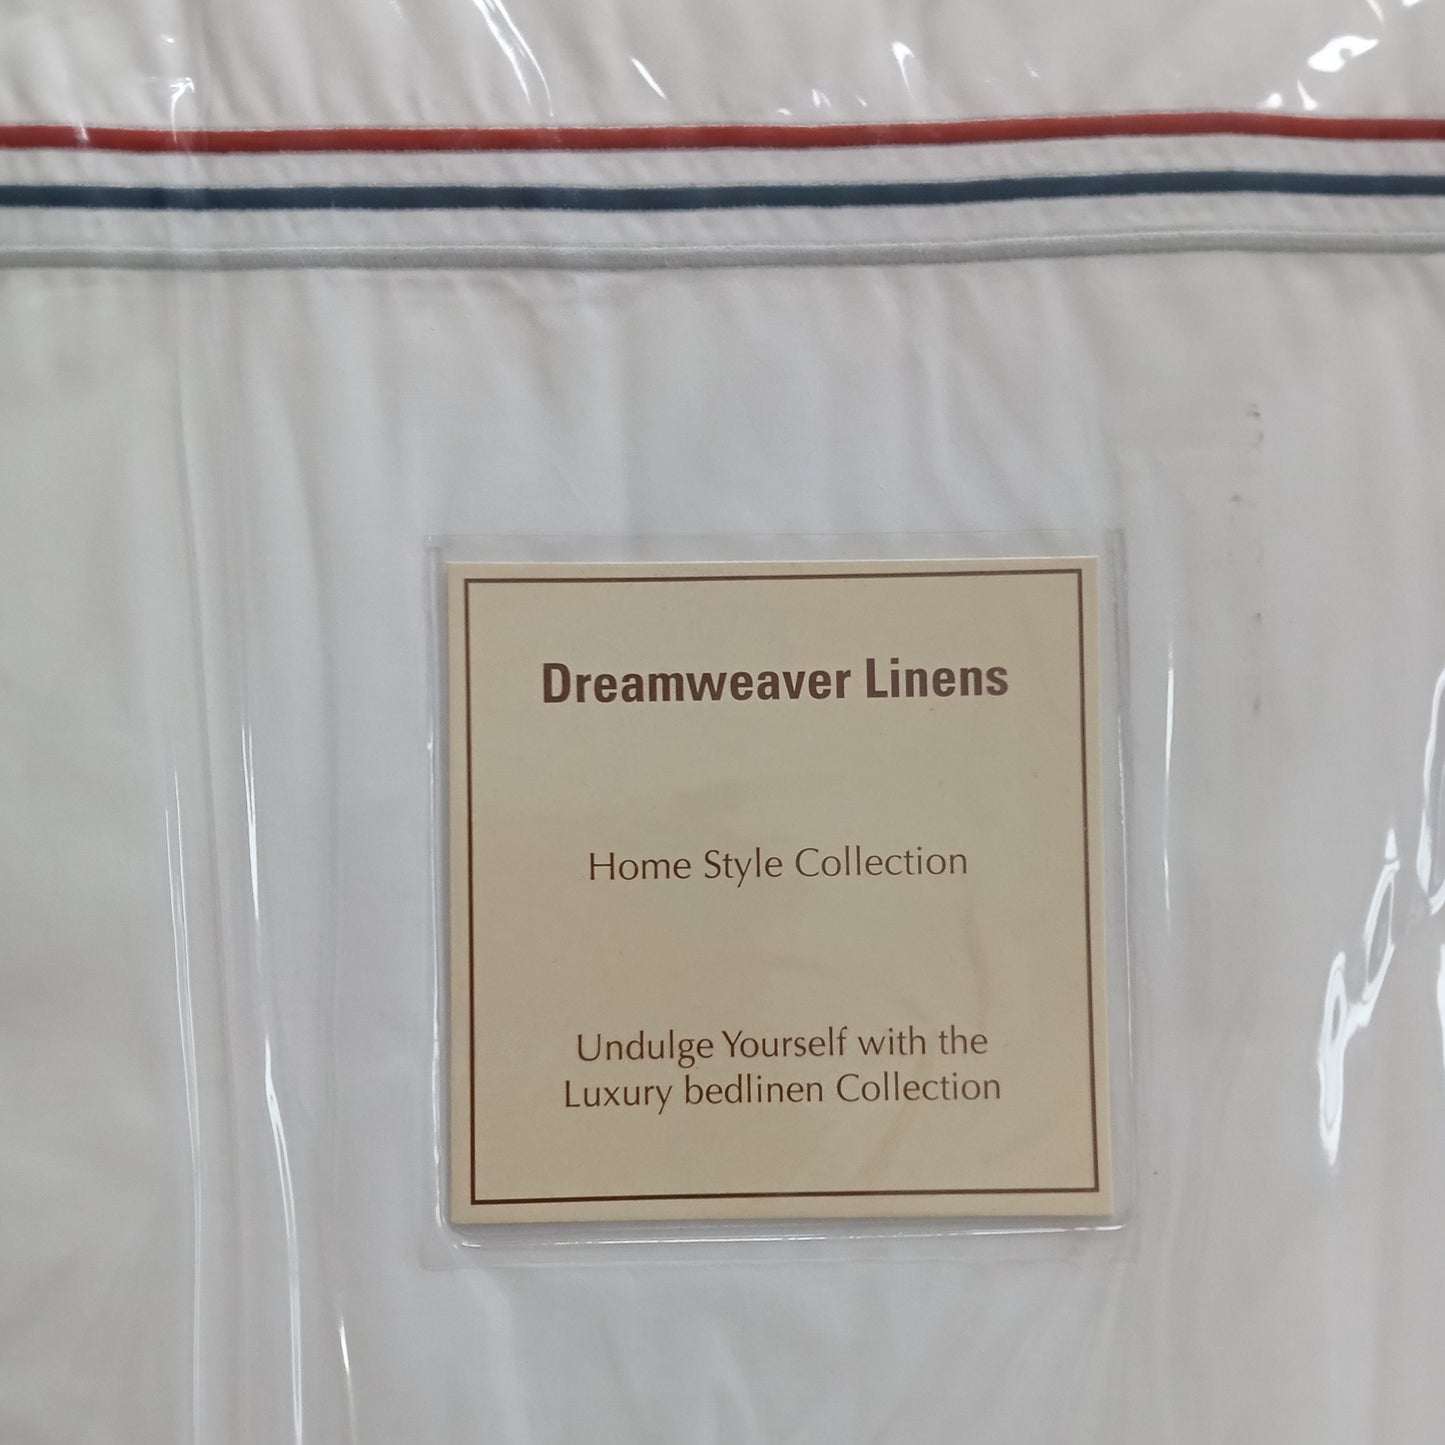 Three Stitched Piped Duvet Cover by Dreamweaver Linens